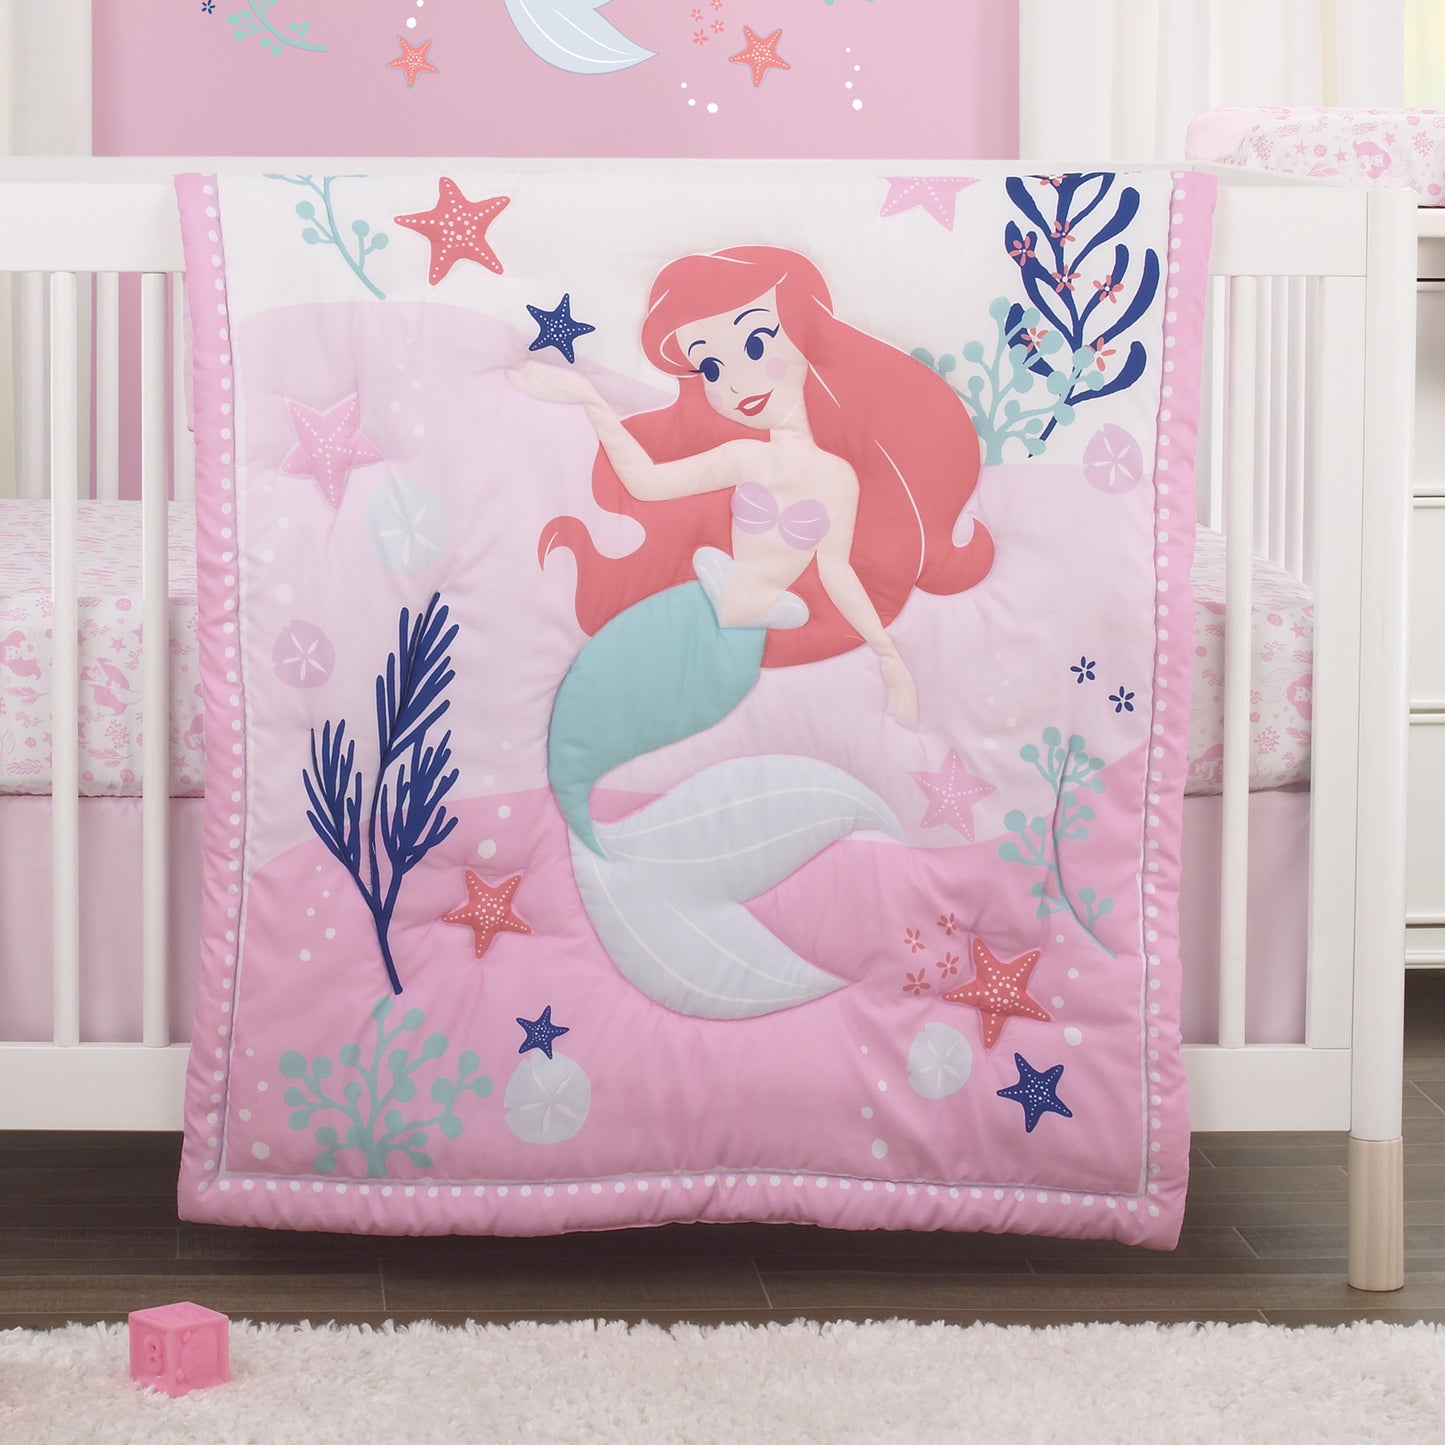 Disney The Little Mermaid Pink, Aqua, and Coral Ariel Cute by Nature 4 Piece Nursery Crib Bedding Set - Comforter, Fitted Crib Sheet, Changing Pad Cover, and Crib Skirt